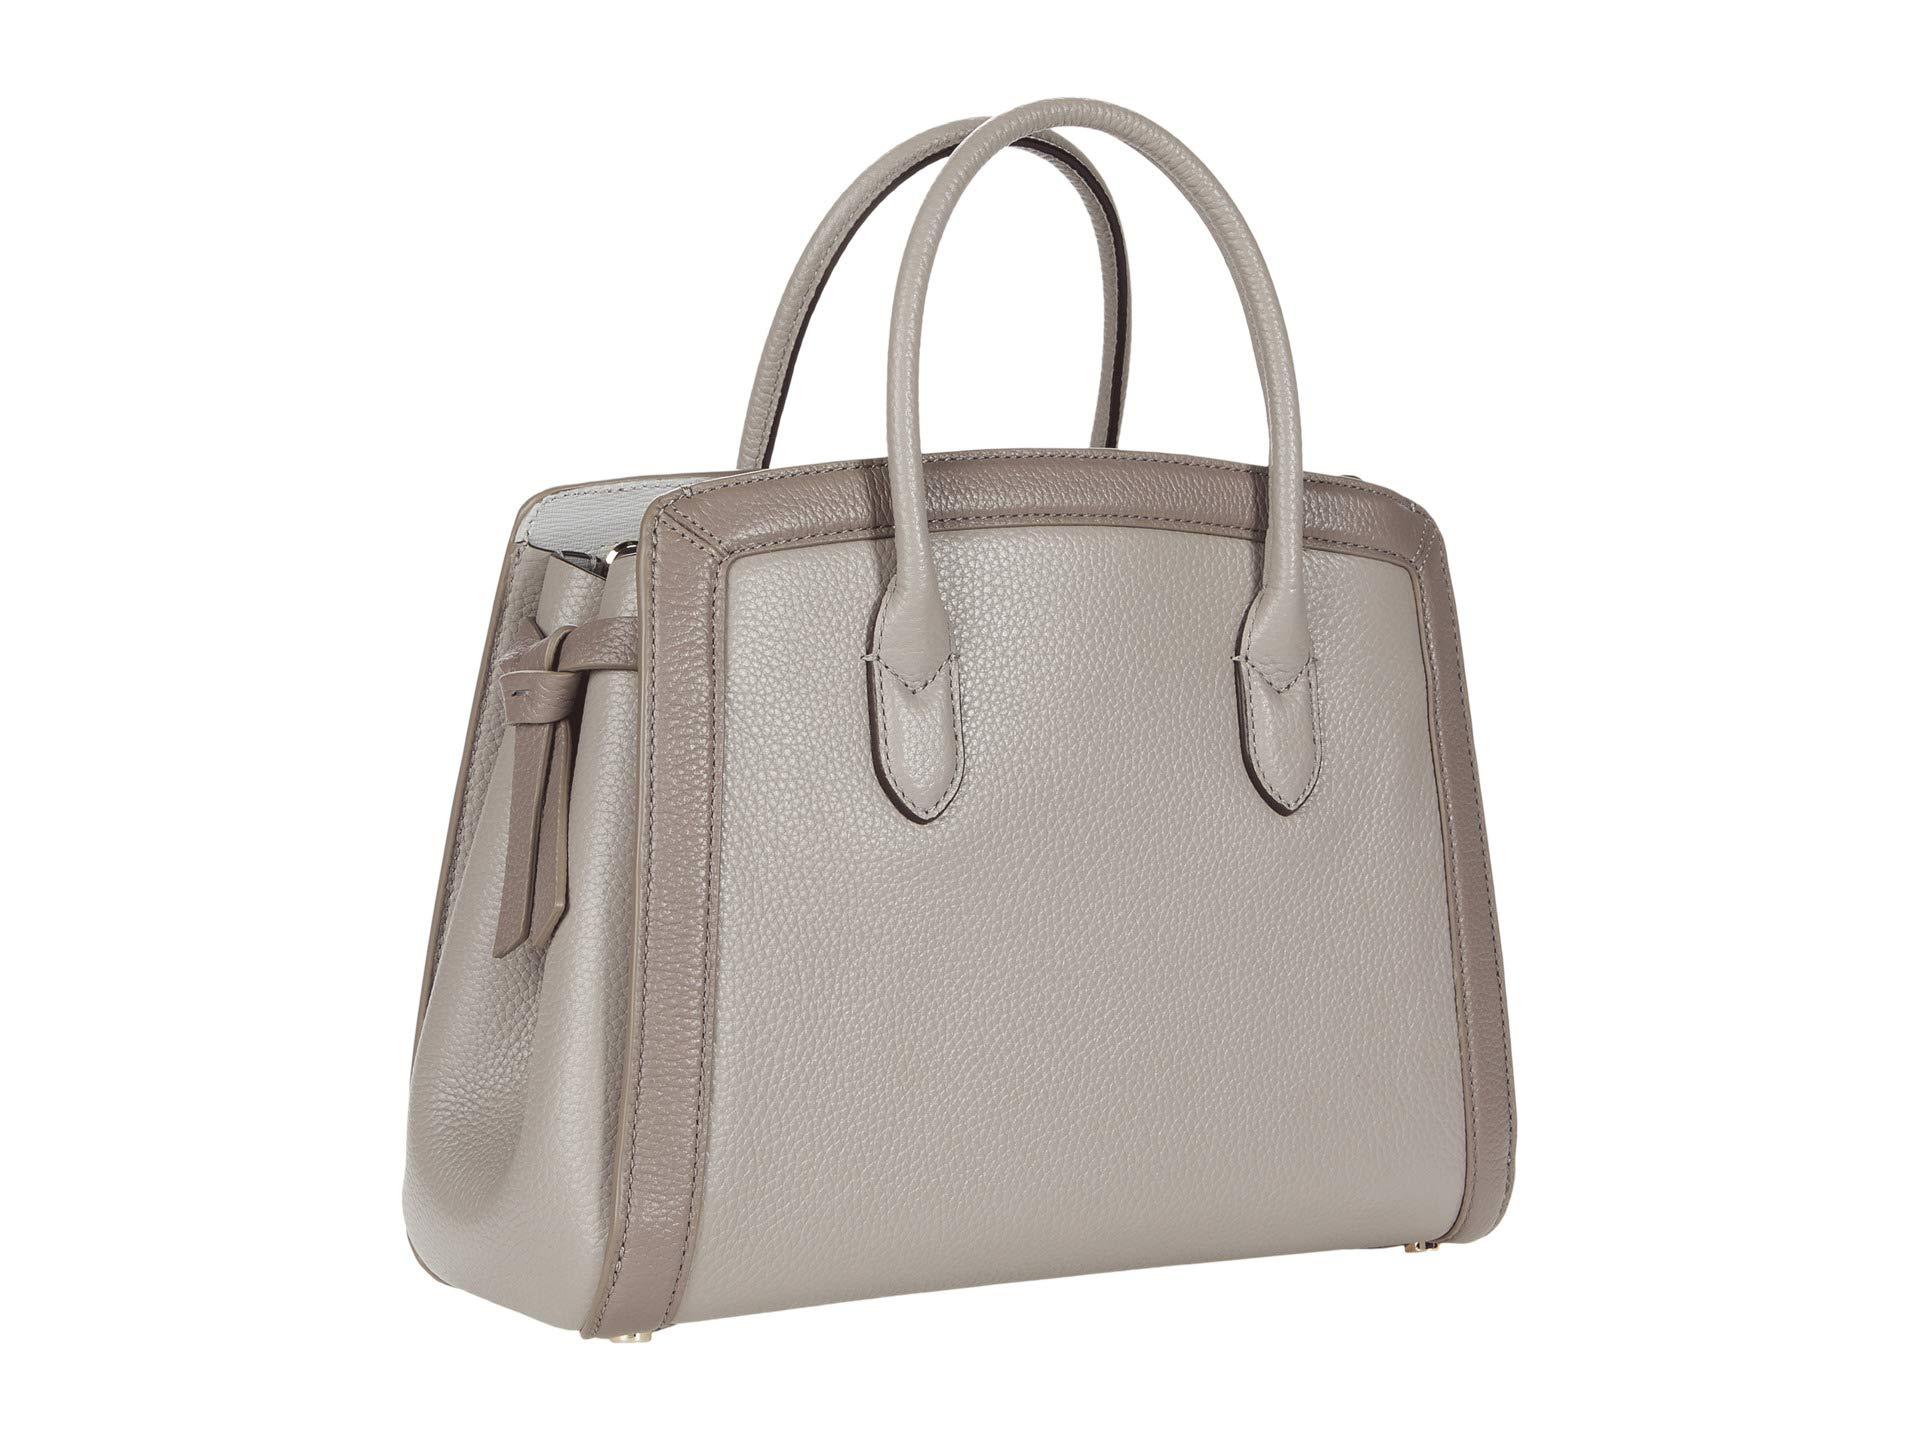 Kate Spade Leather Knott Medium Satchel in Taupe (Gray) - Lyst